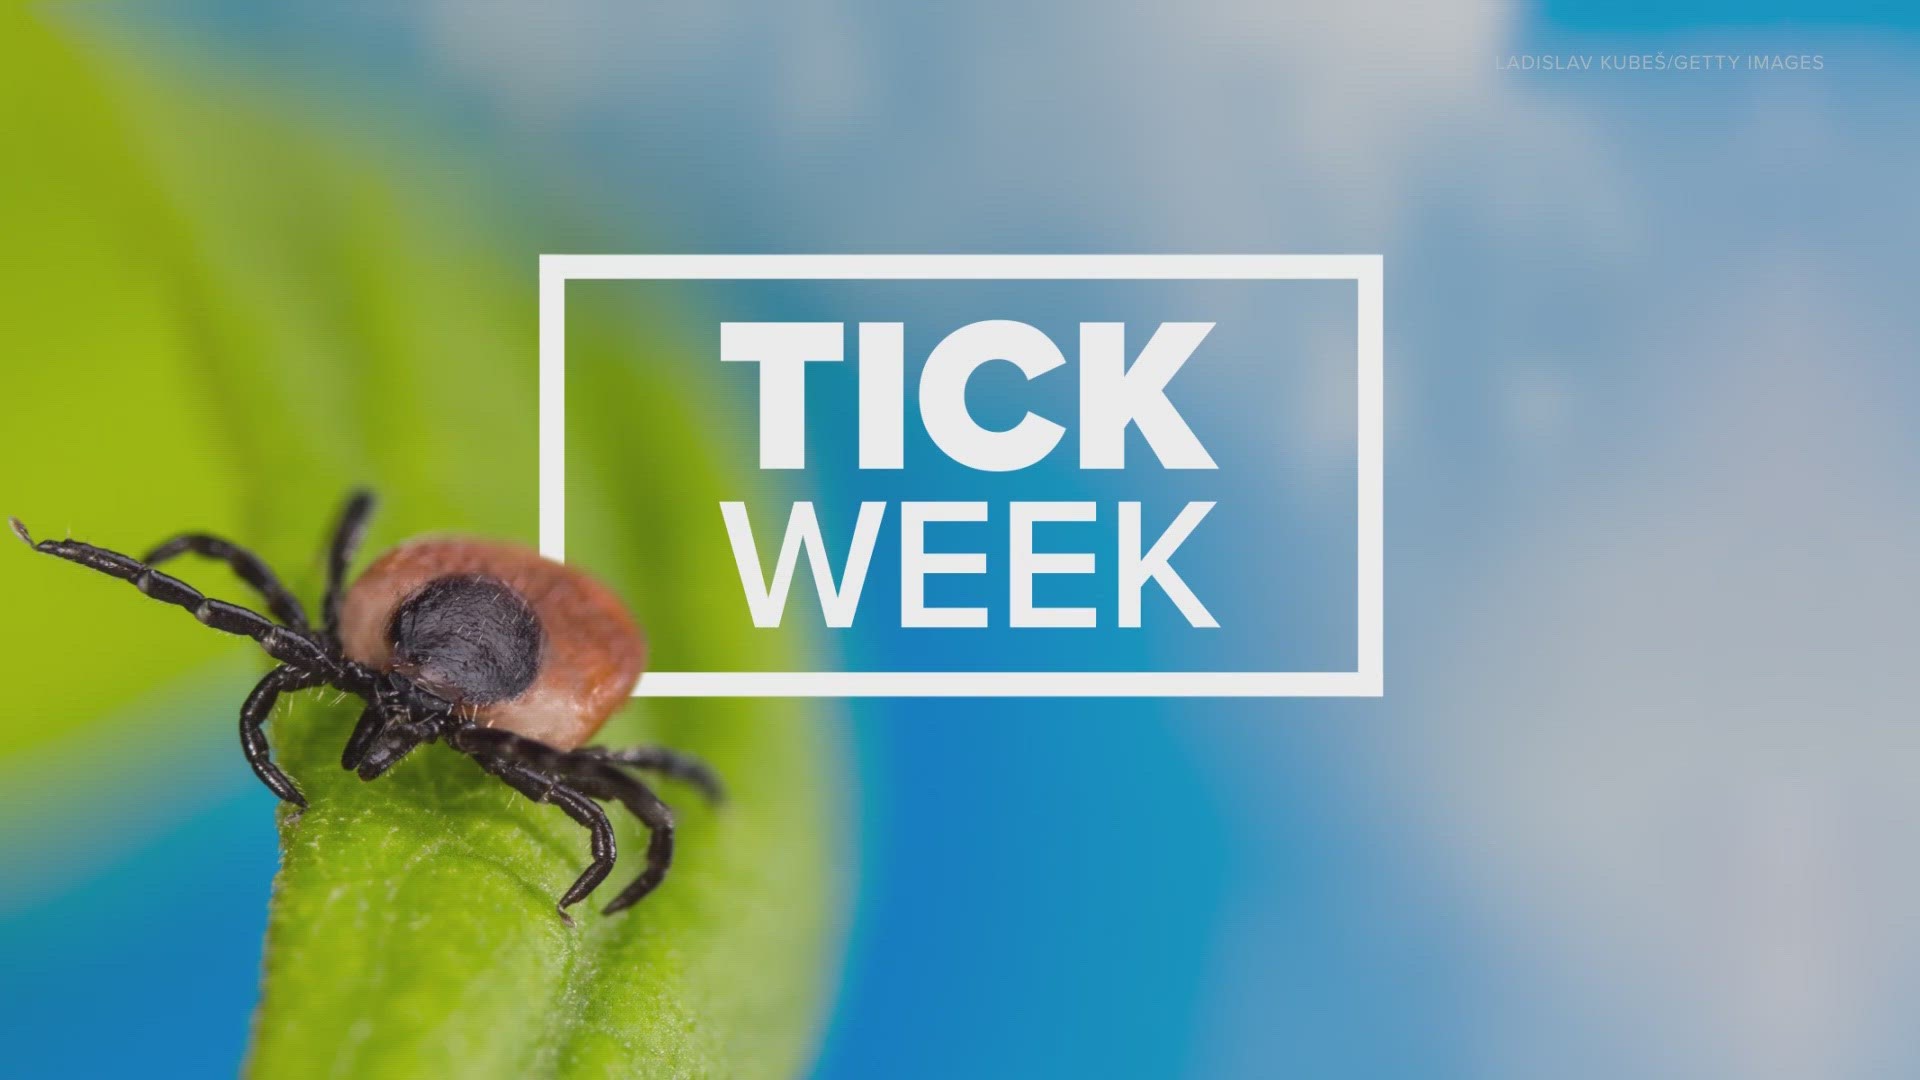 The proposal would ensure physicians receive full diagnostic test data concerning tickborne diseases.